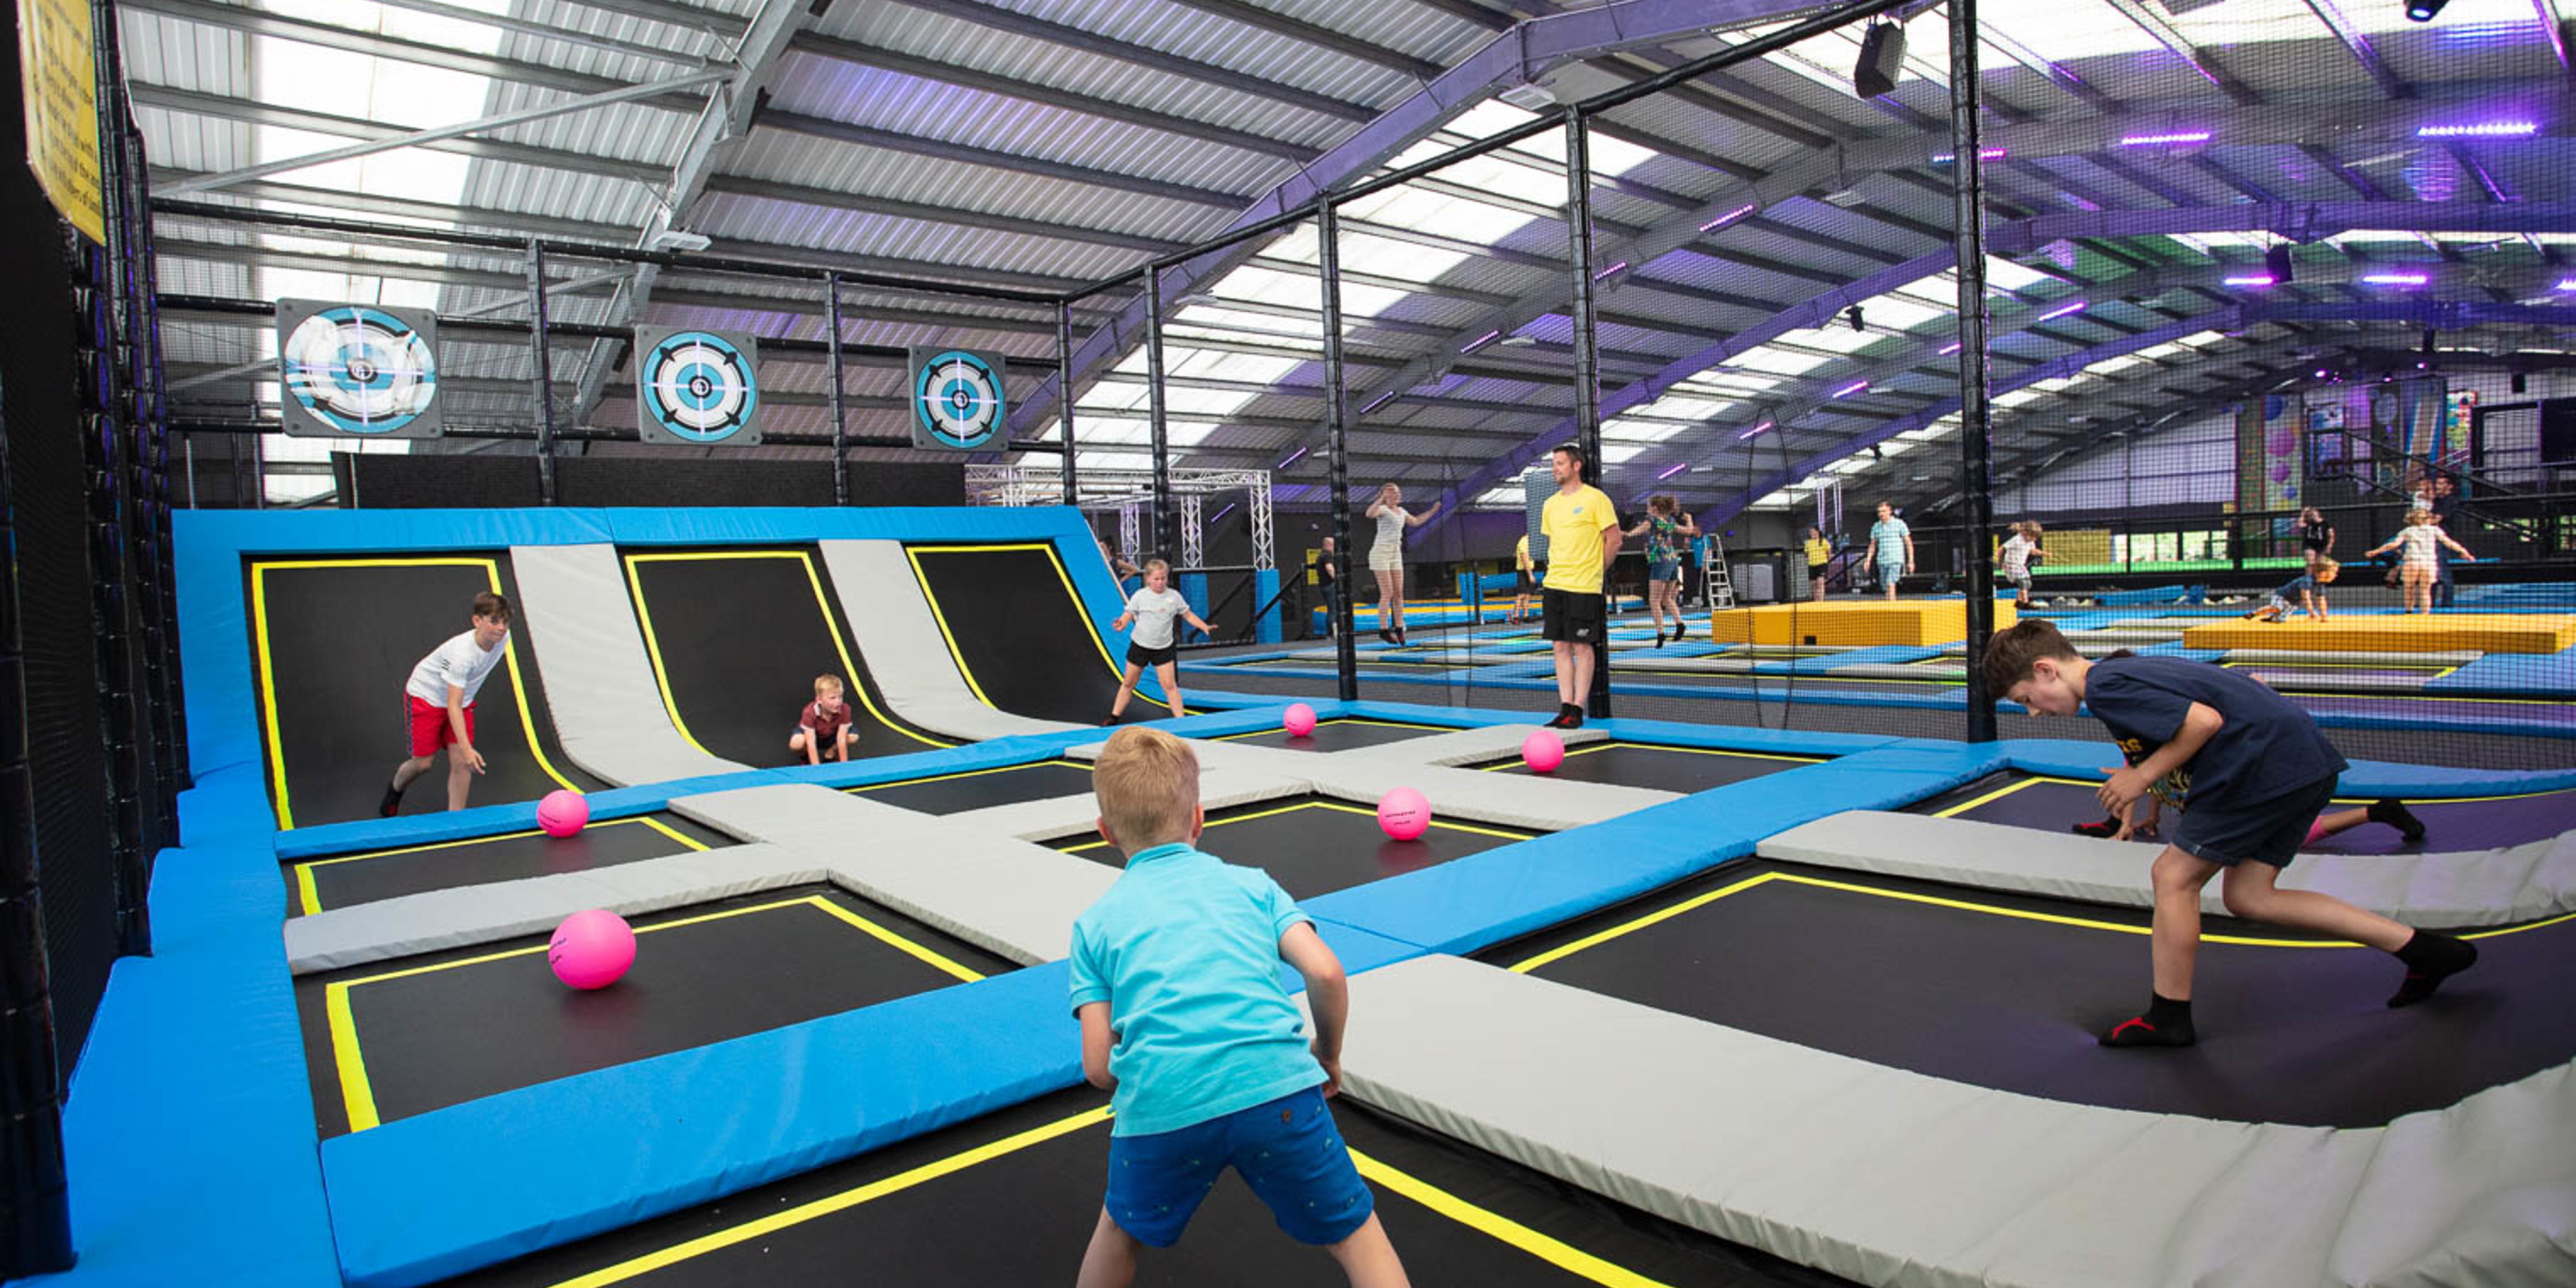 Kids playing on the trampoline dodgeball courts at Jump Jersey